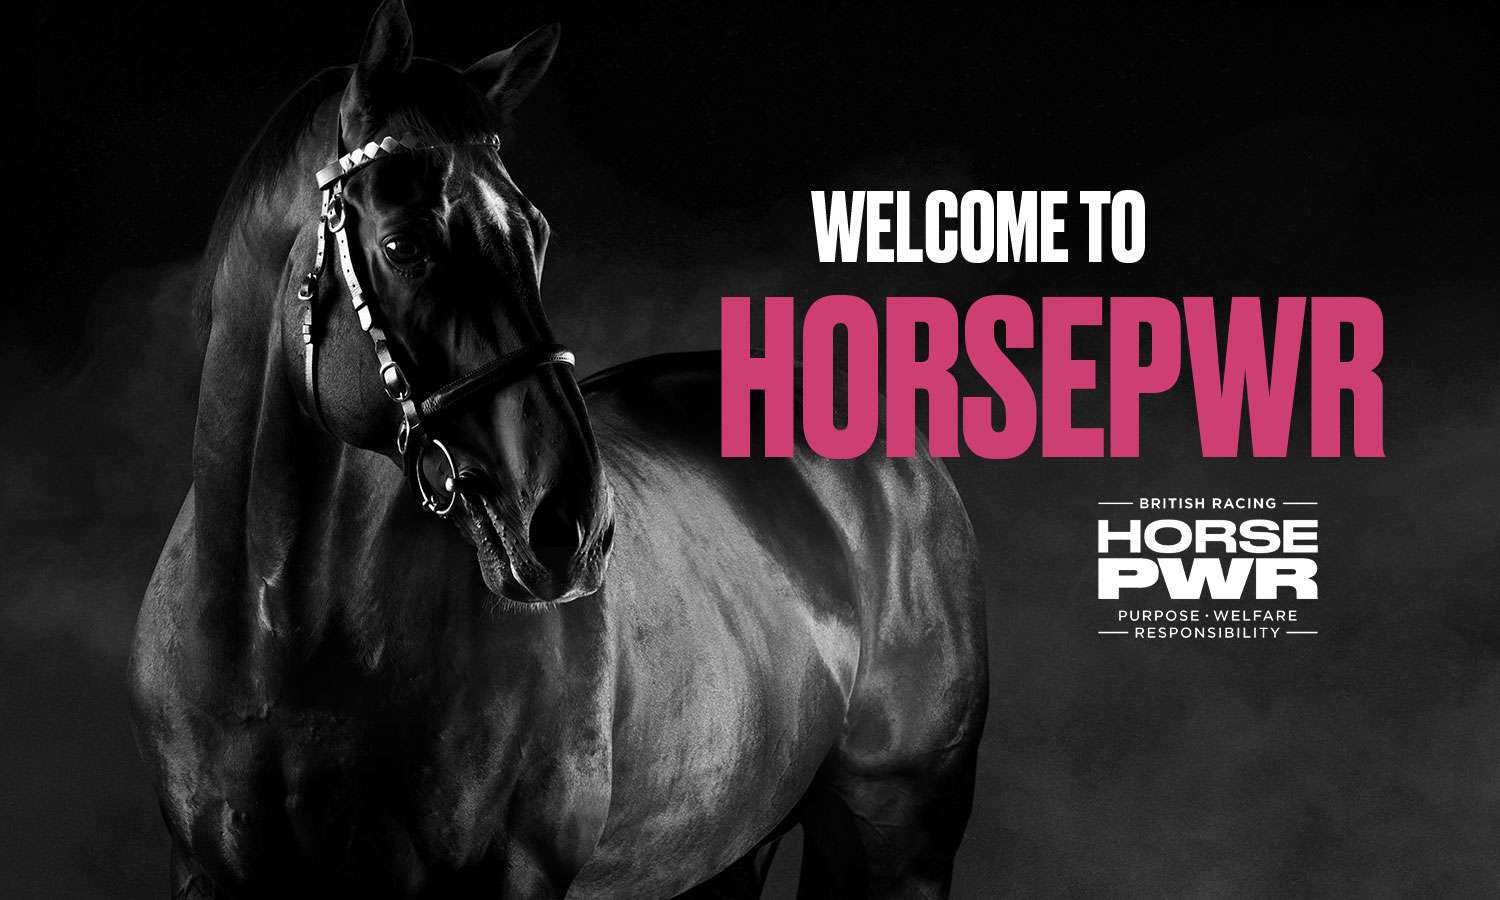 bha horsePWR hub image featuring a black horse to help raise awareness of equine welfare in racing